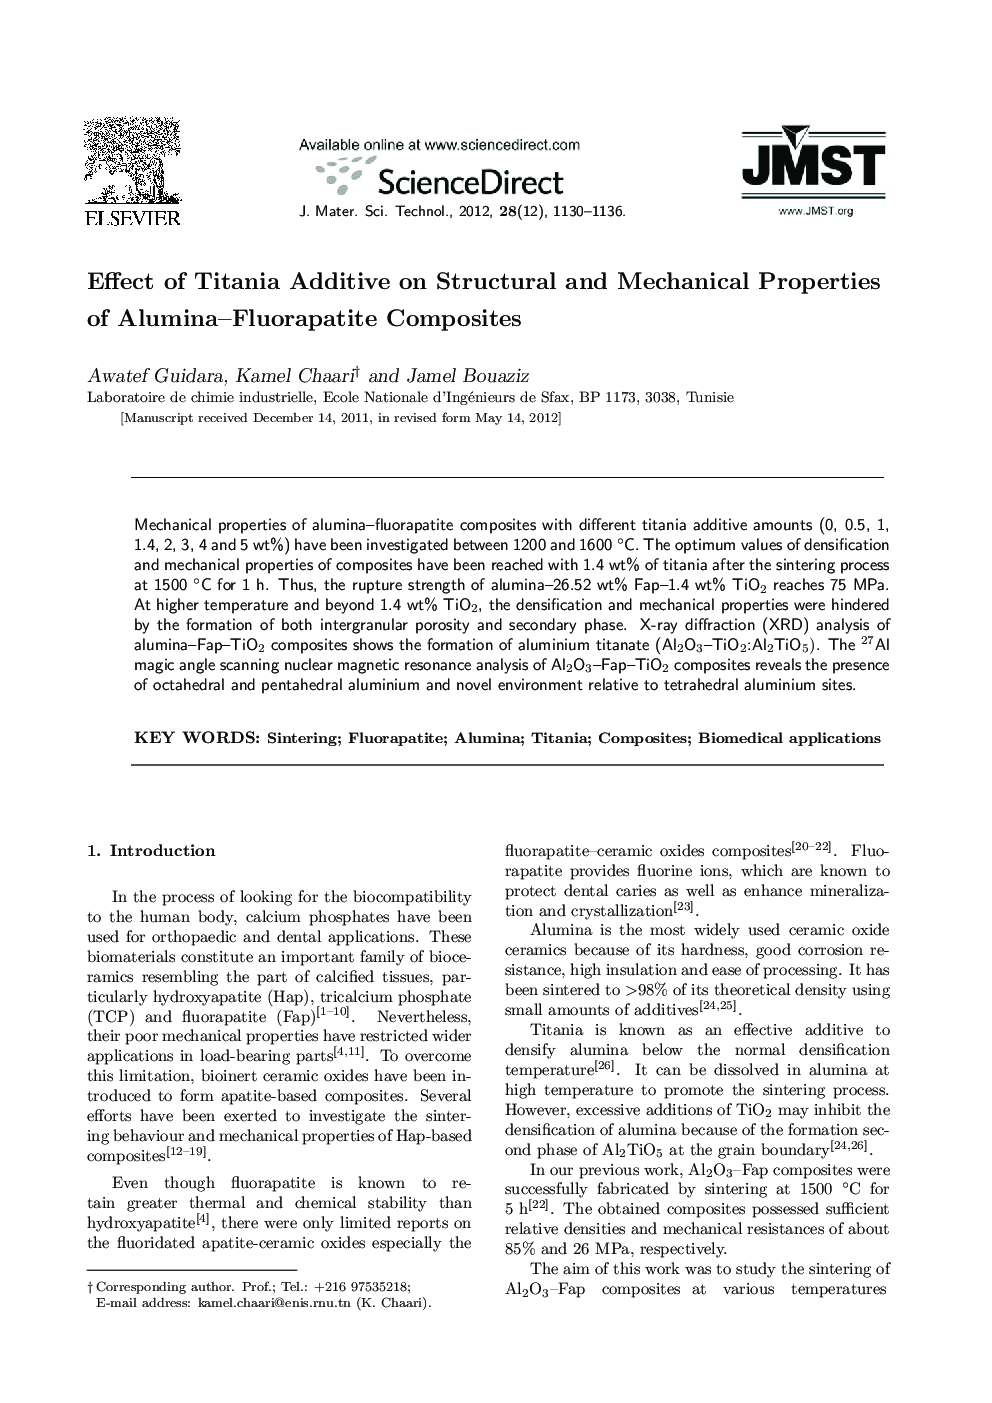 Effect of Titania Additive on Structural and Mechanical Properties of Alumina-Fluorapatite Composites